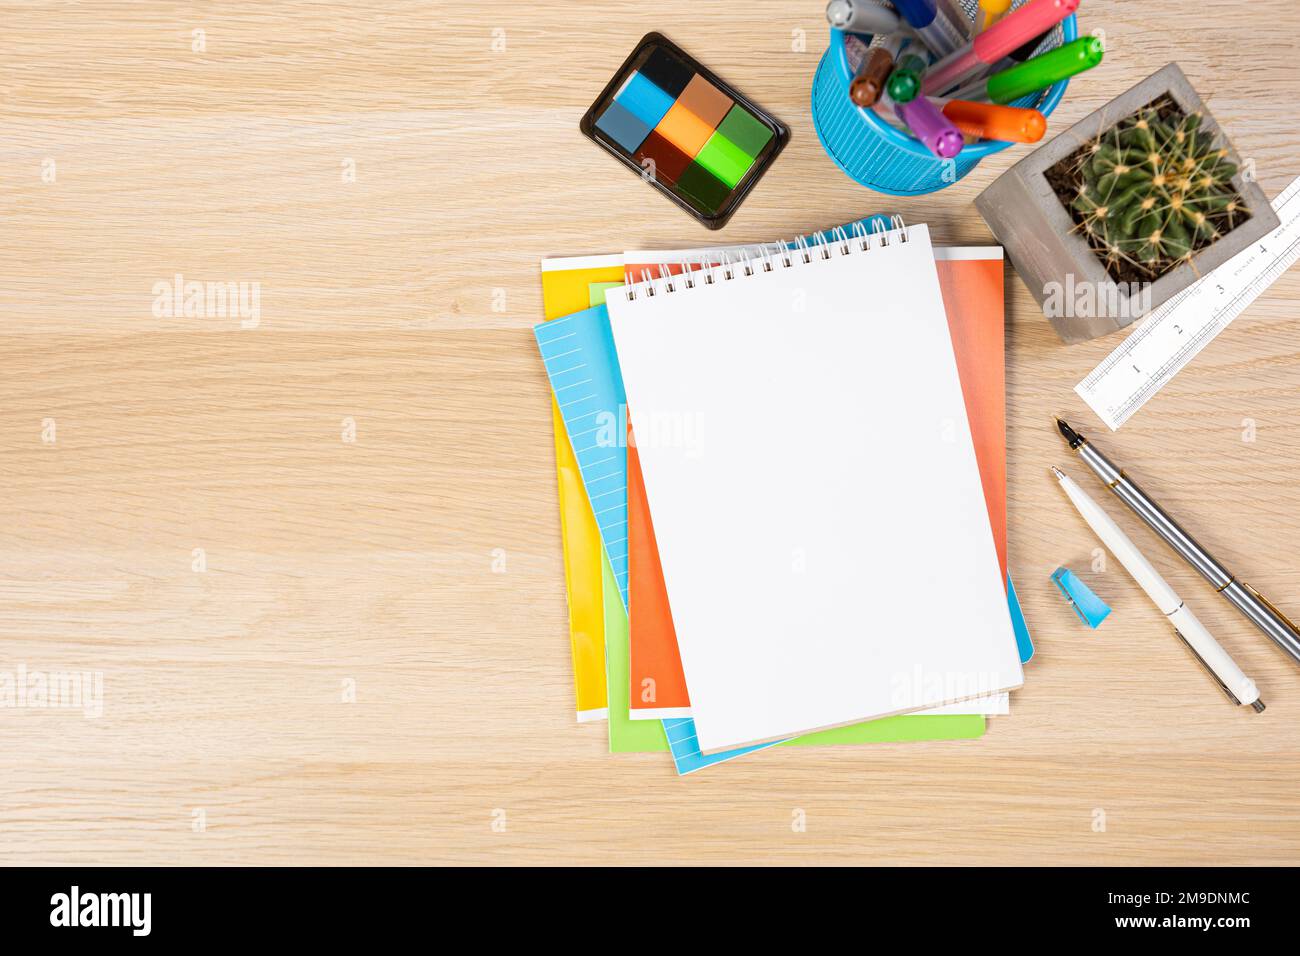 Back to school concept. Top view photo of notepads, pens, sharpeners, ruler, staplers, clips, markers and erasers on wooden table Stock Photo